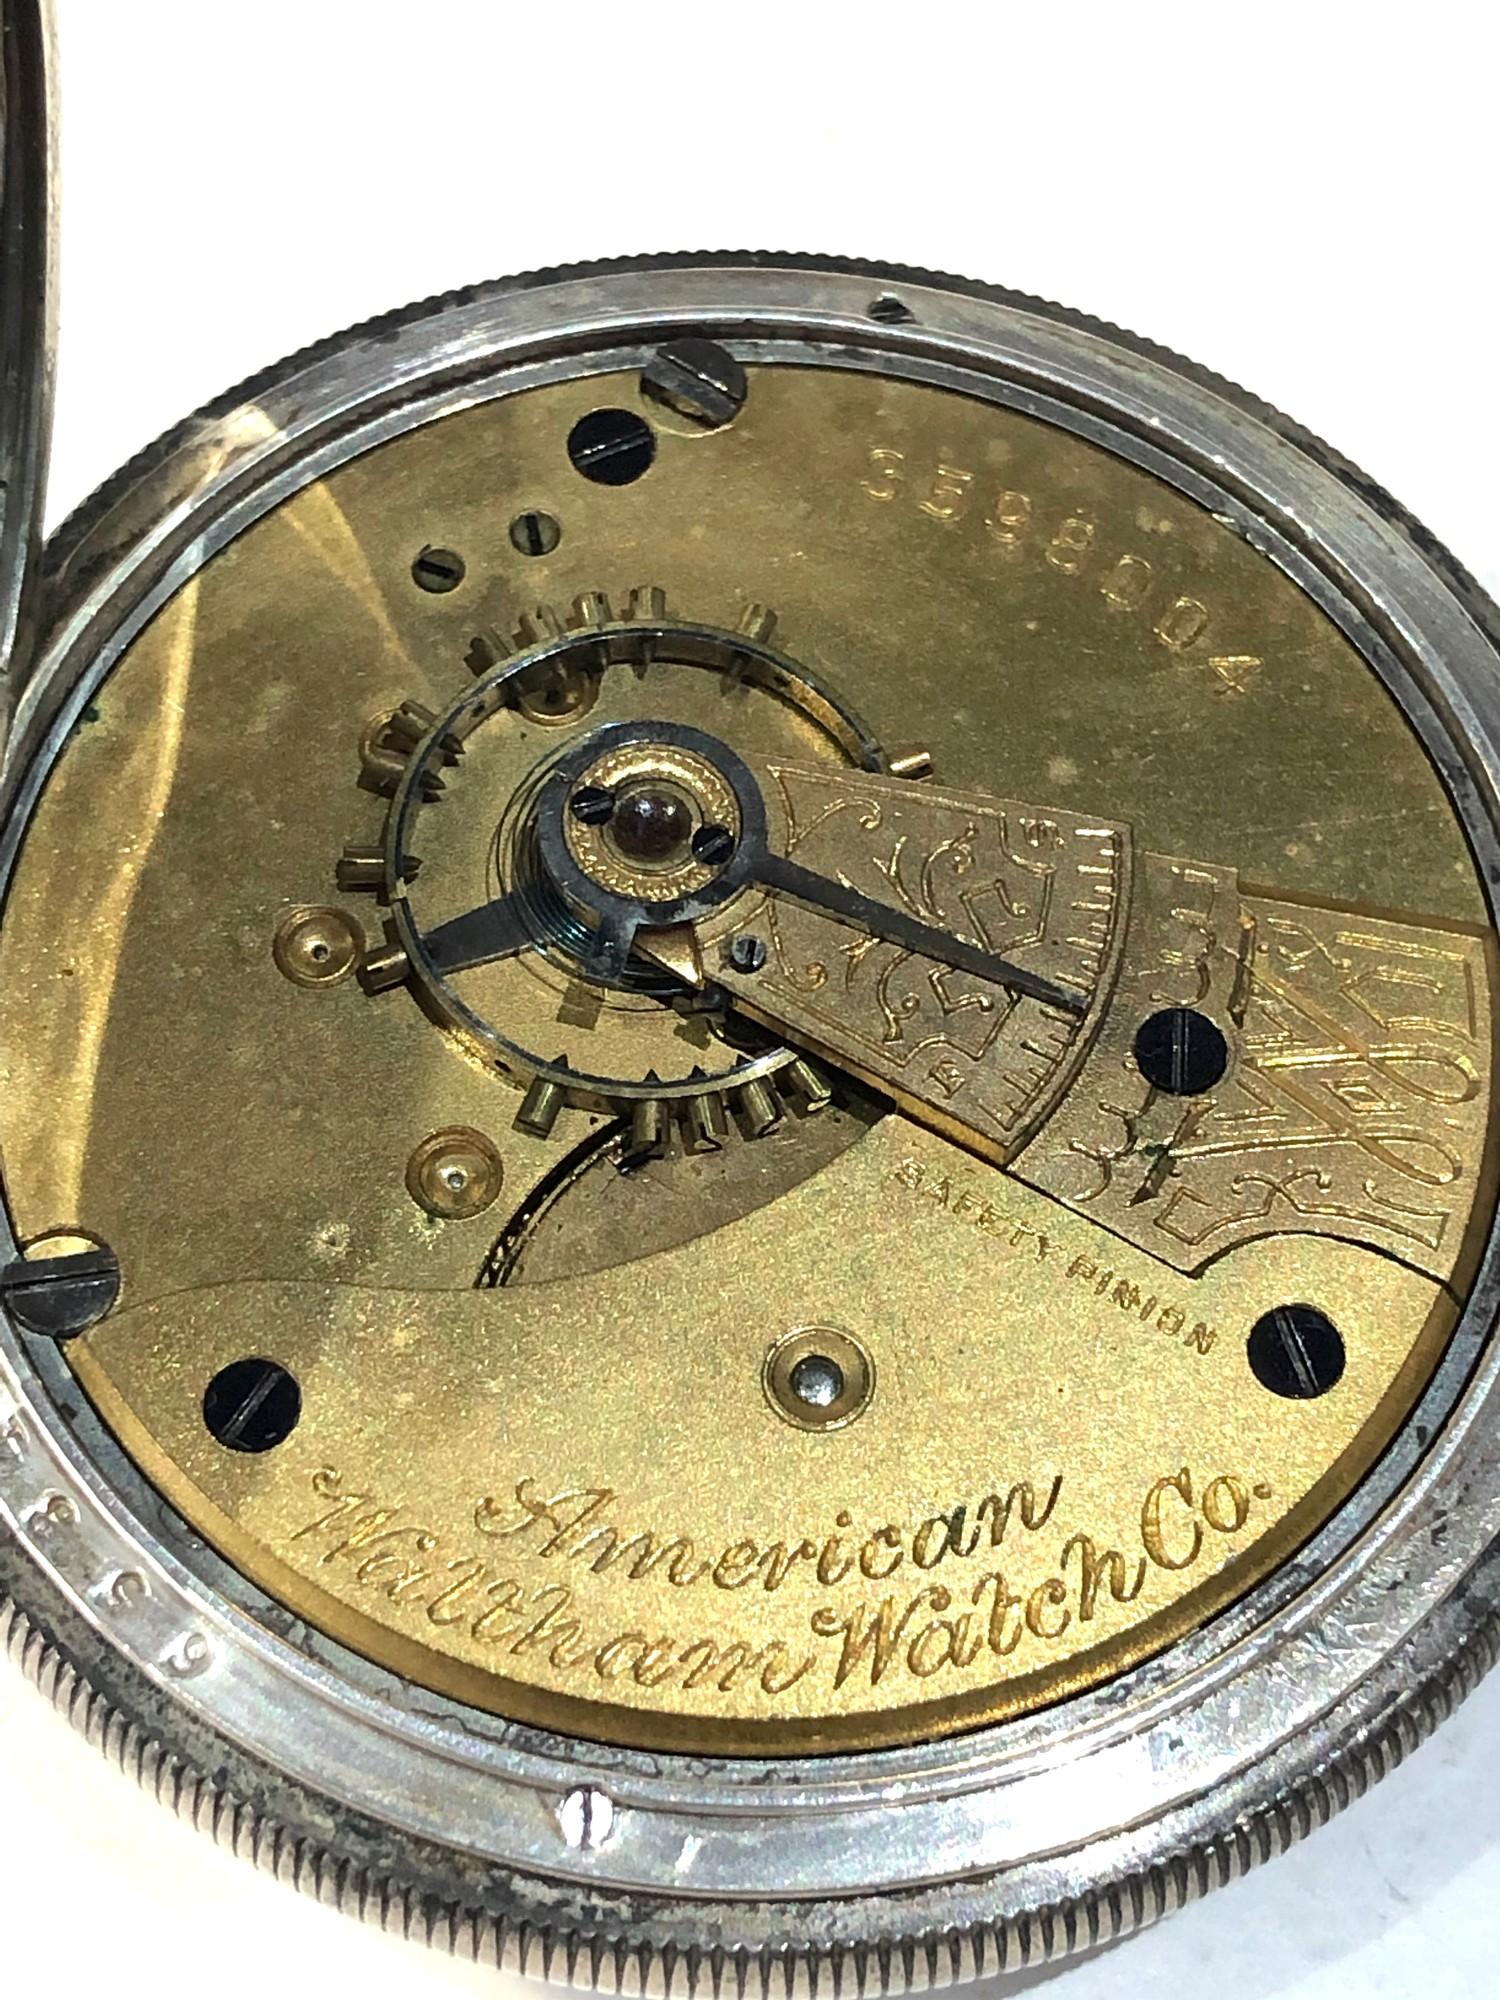 Antique silver cased Am watch Co waltham pocket watch balance will spin does not tick keeps - Image 5 of 5